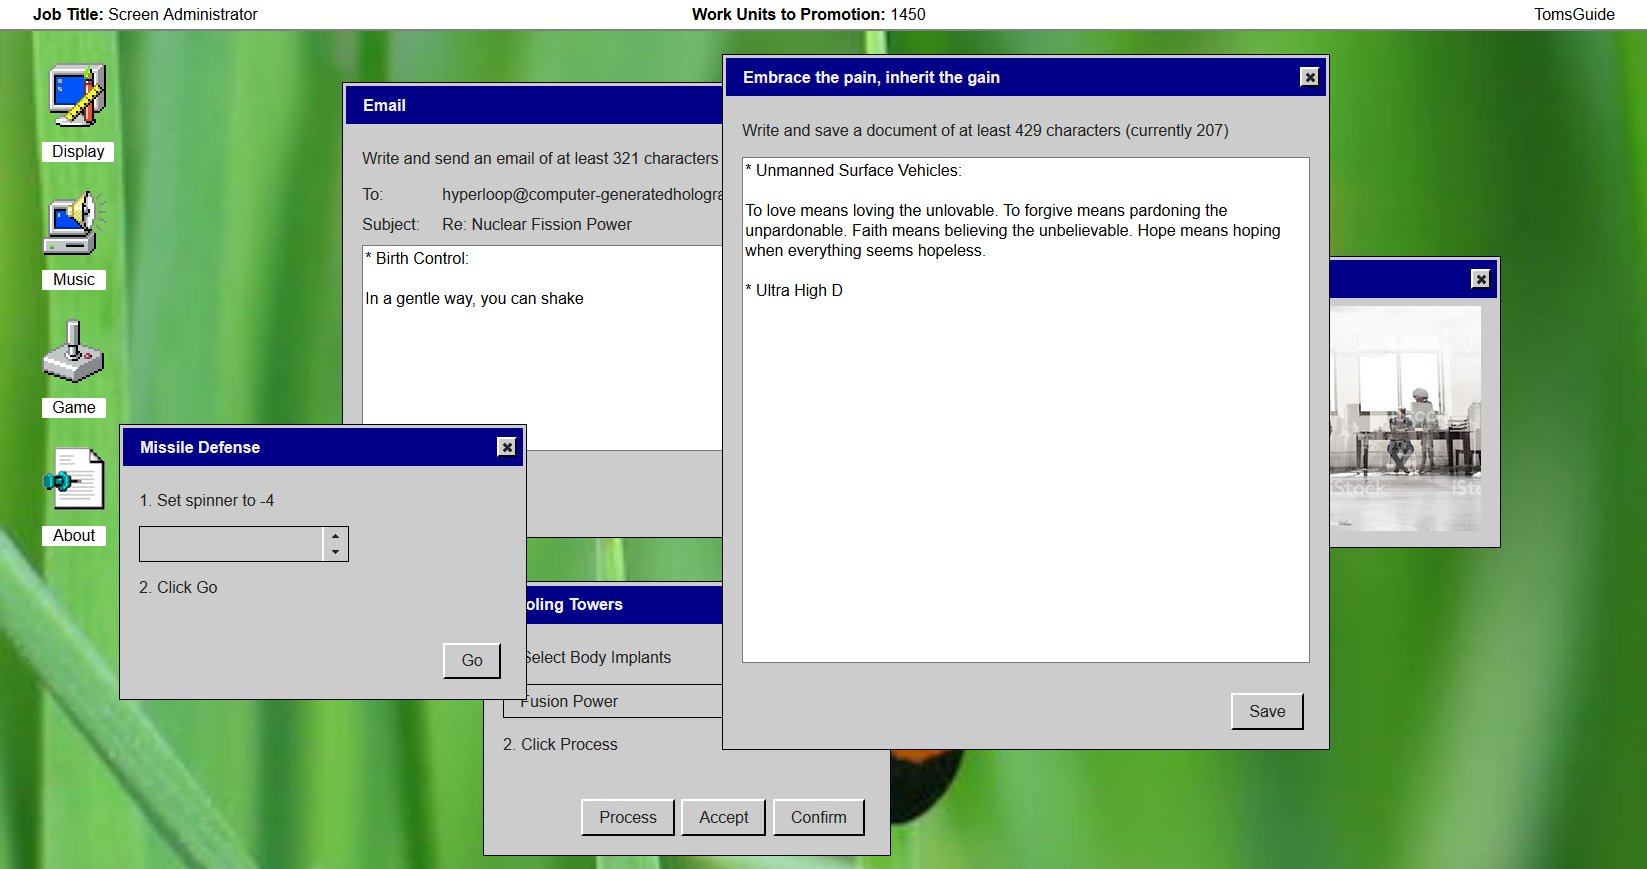 This Windows 95 emulator makes you work while playing (or vice versa)